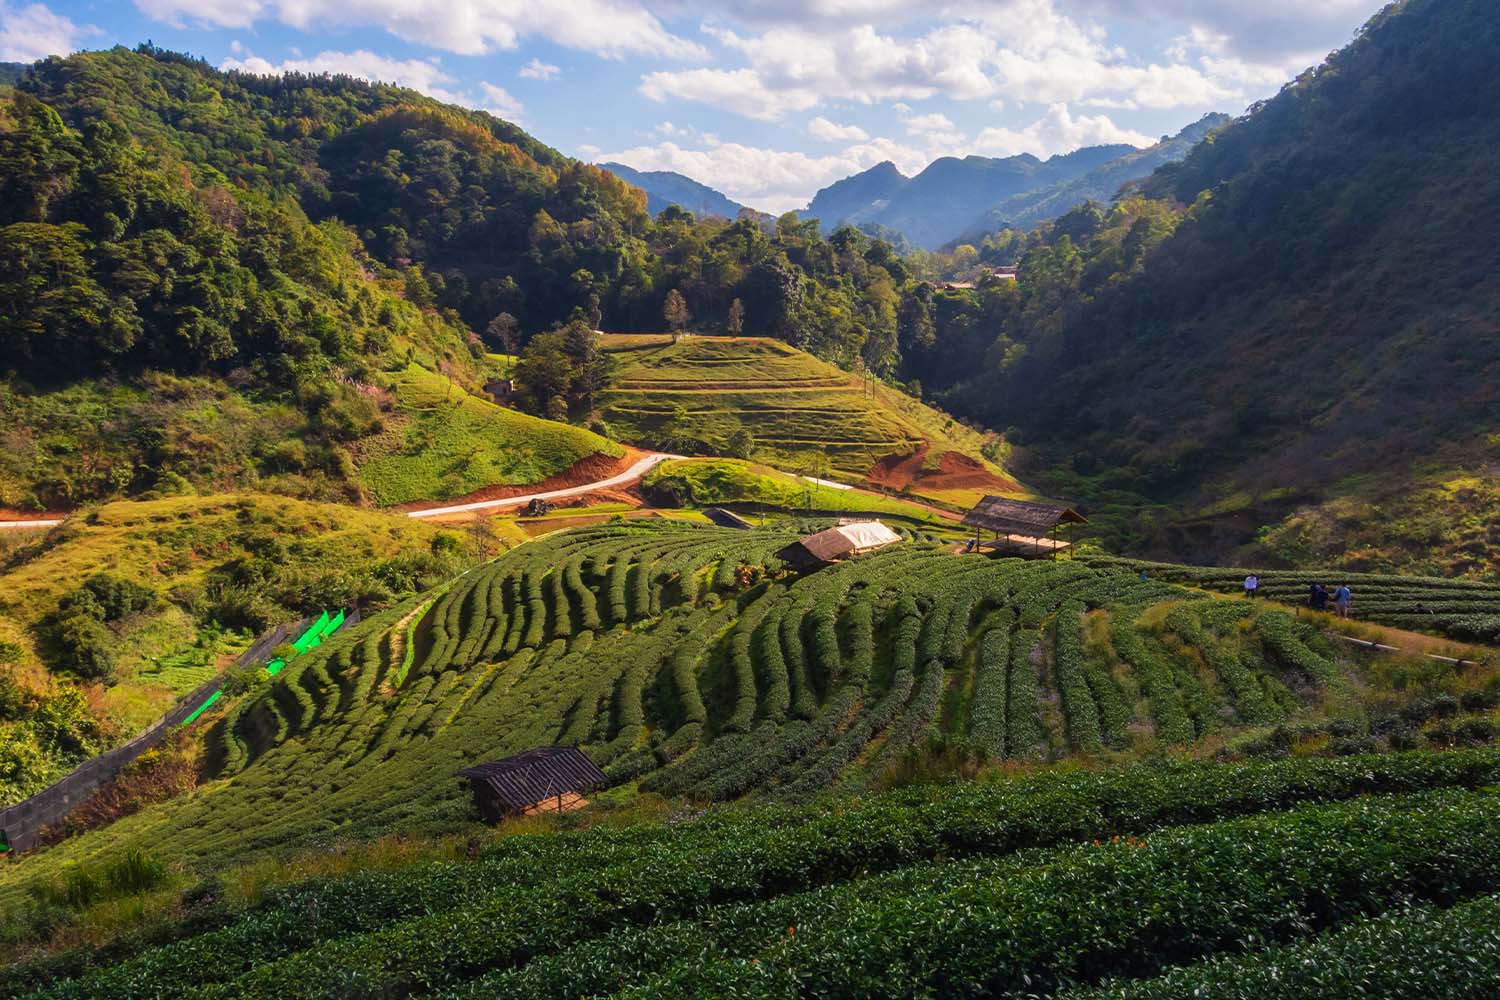 Tea plantation atmosphere in the morning at Song Phan Tea Plantation, Doi Ang Khang, a famous tourist attraction in Chiang Mai, Thailand.